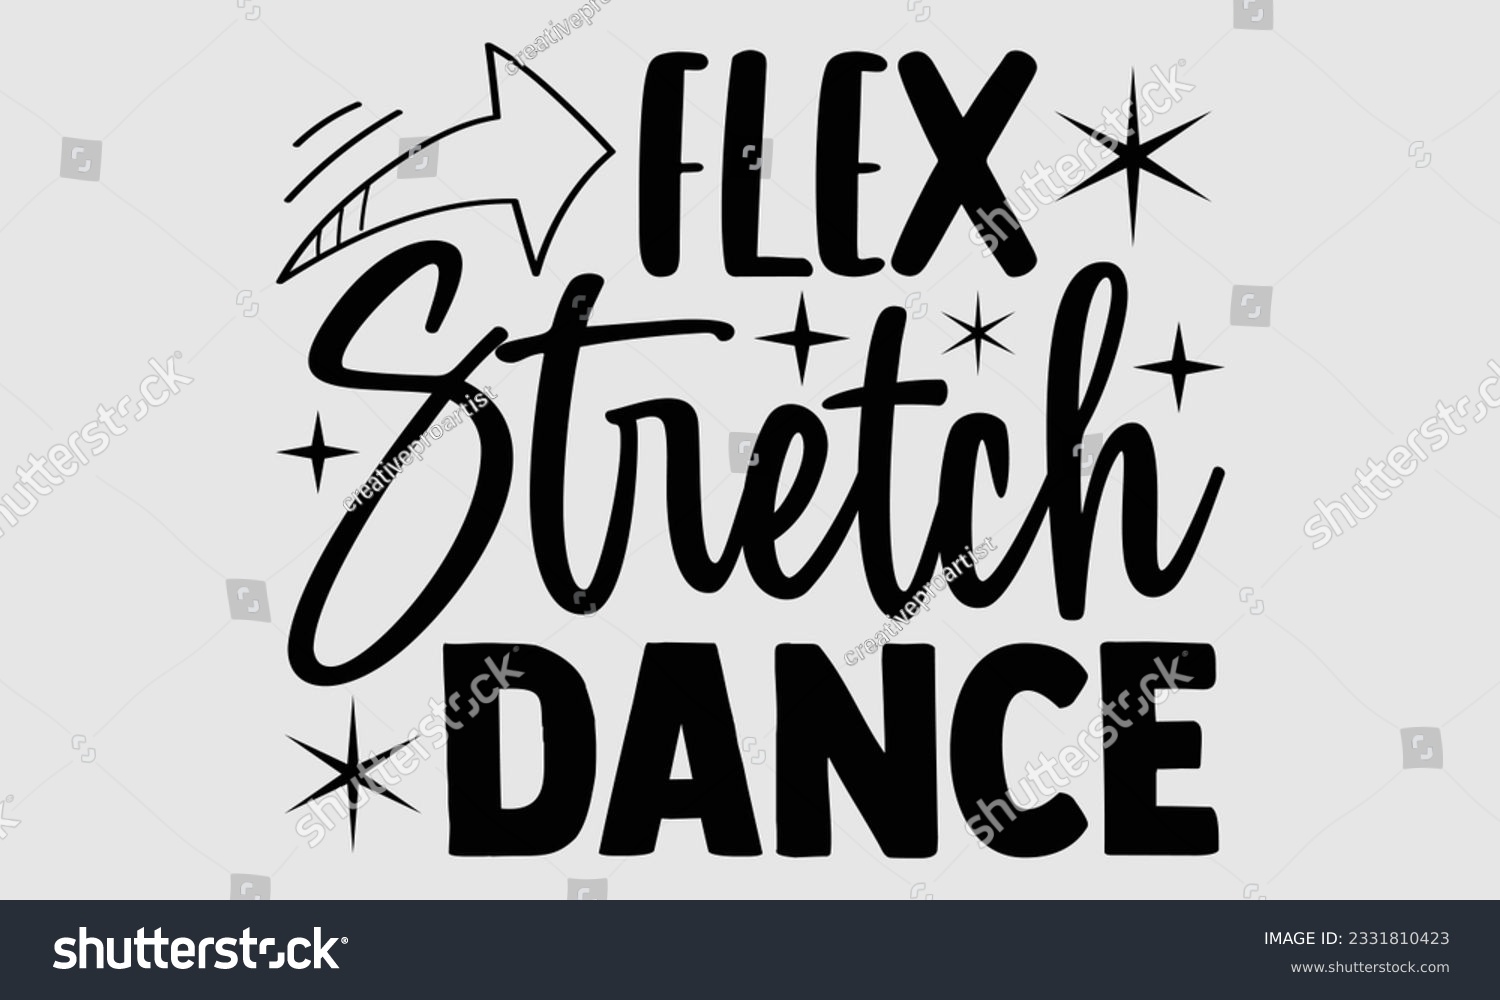 SVG of 
Flex Stretch Dance- Dance SVG and t- shirt design, Hand drawn vintage Vector illustration Template for prints on typography and bags, posters, cards, EPS svg